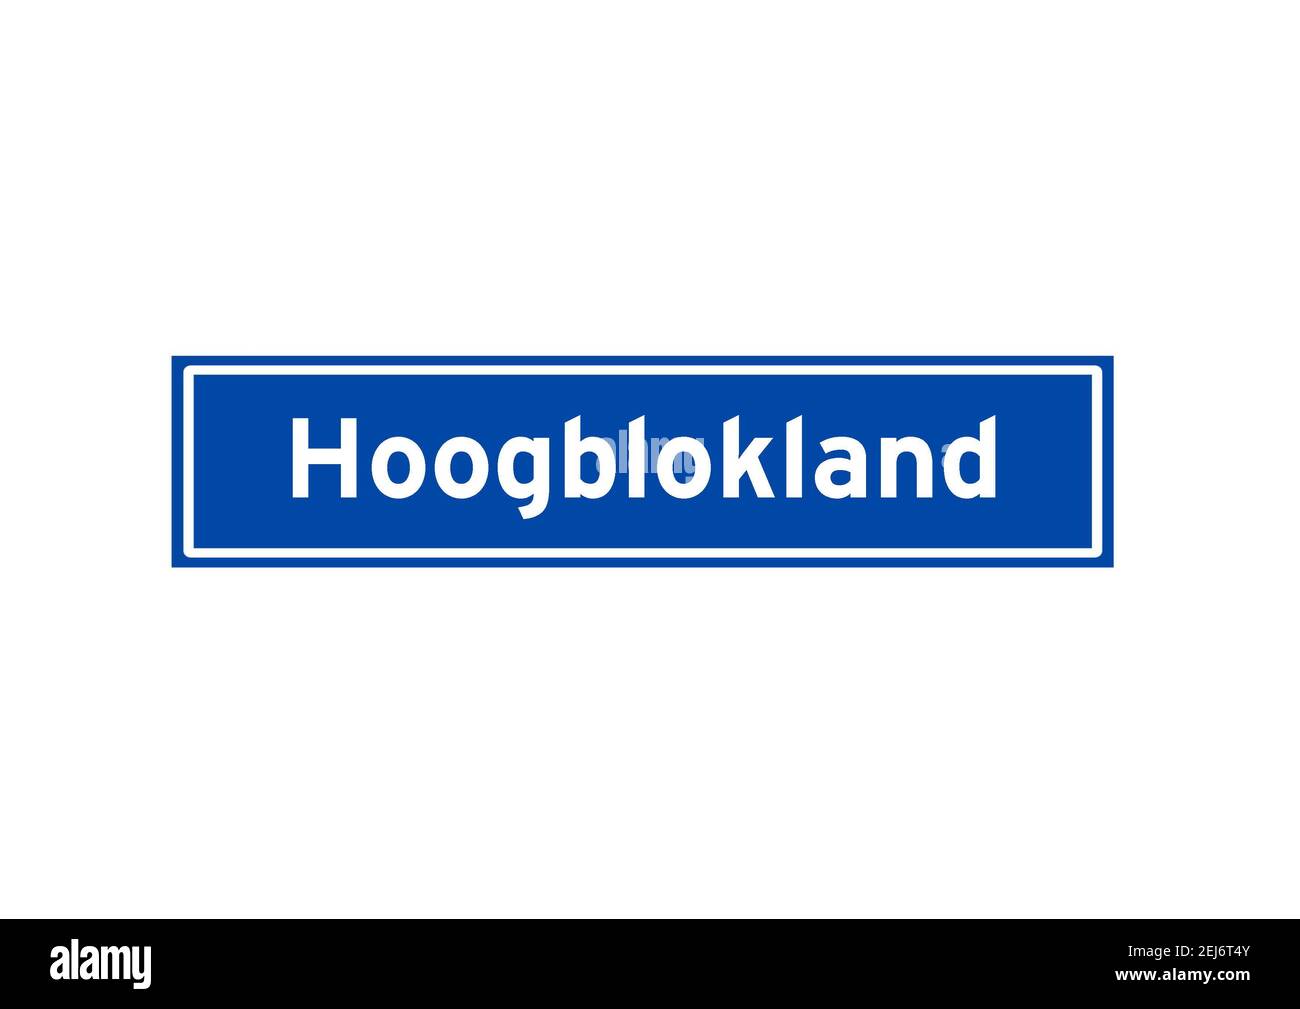 Hoogblokland isolated Dutch place name sign. City sign from the Netherlands. Stock Photo